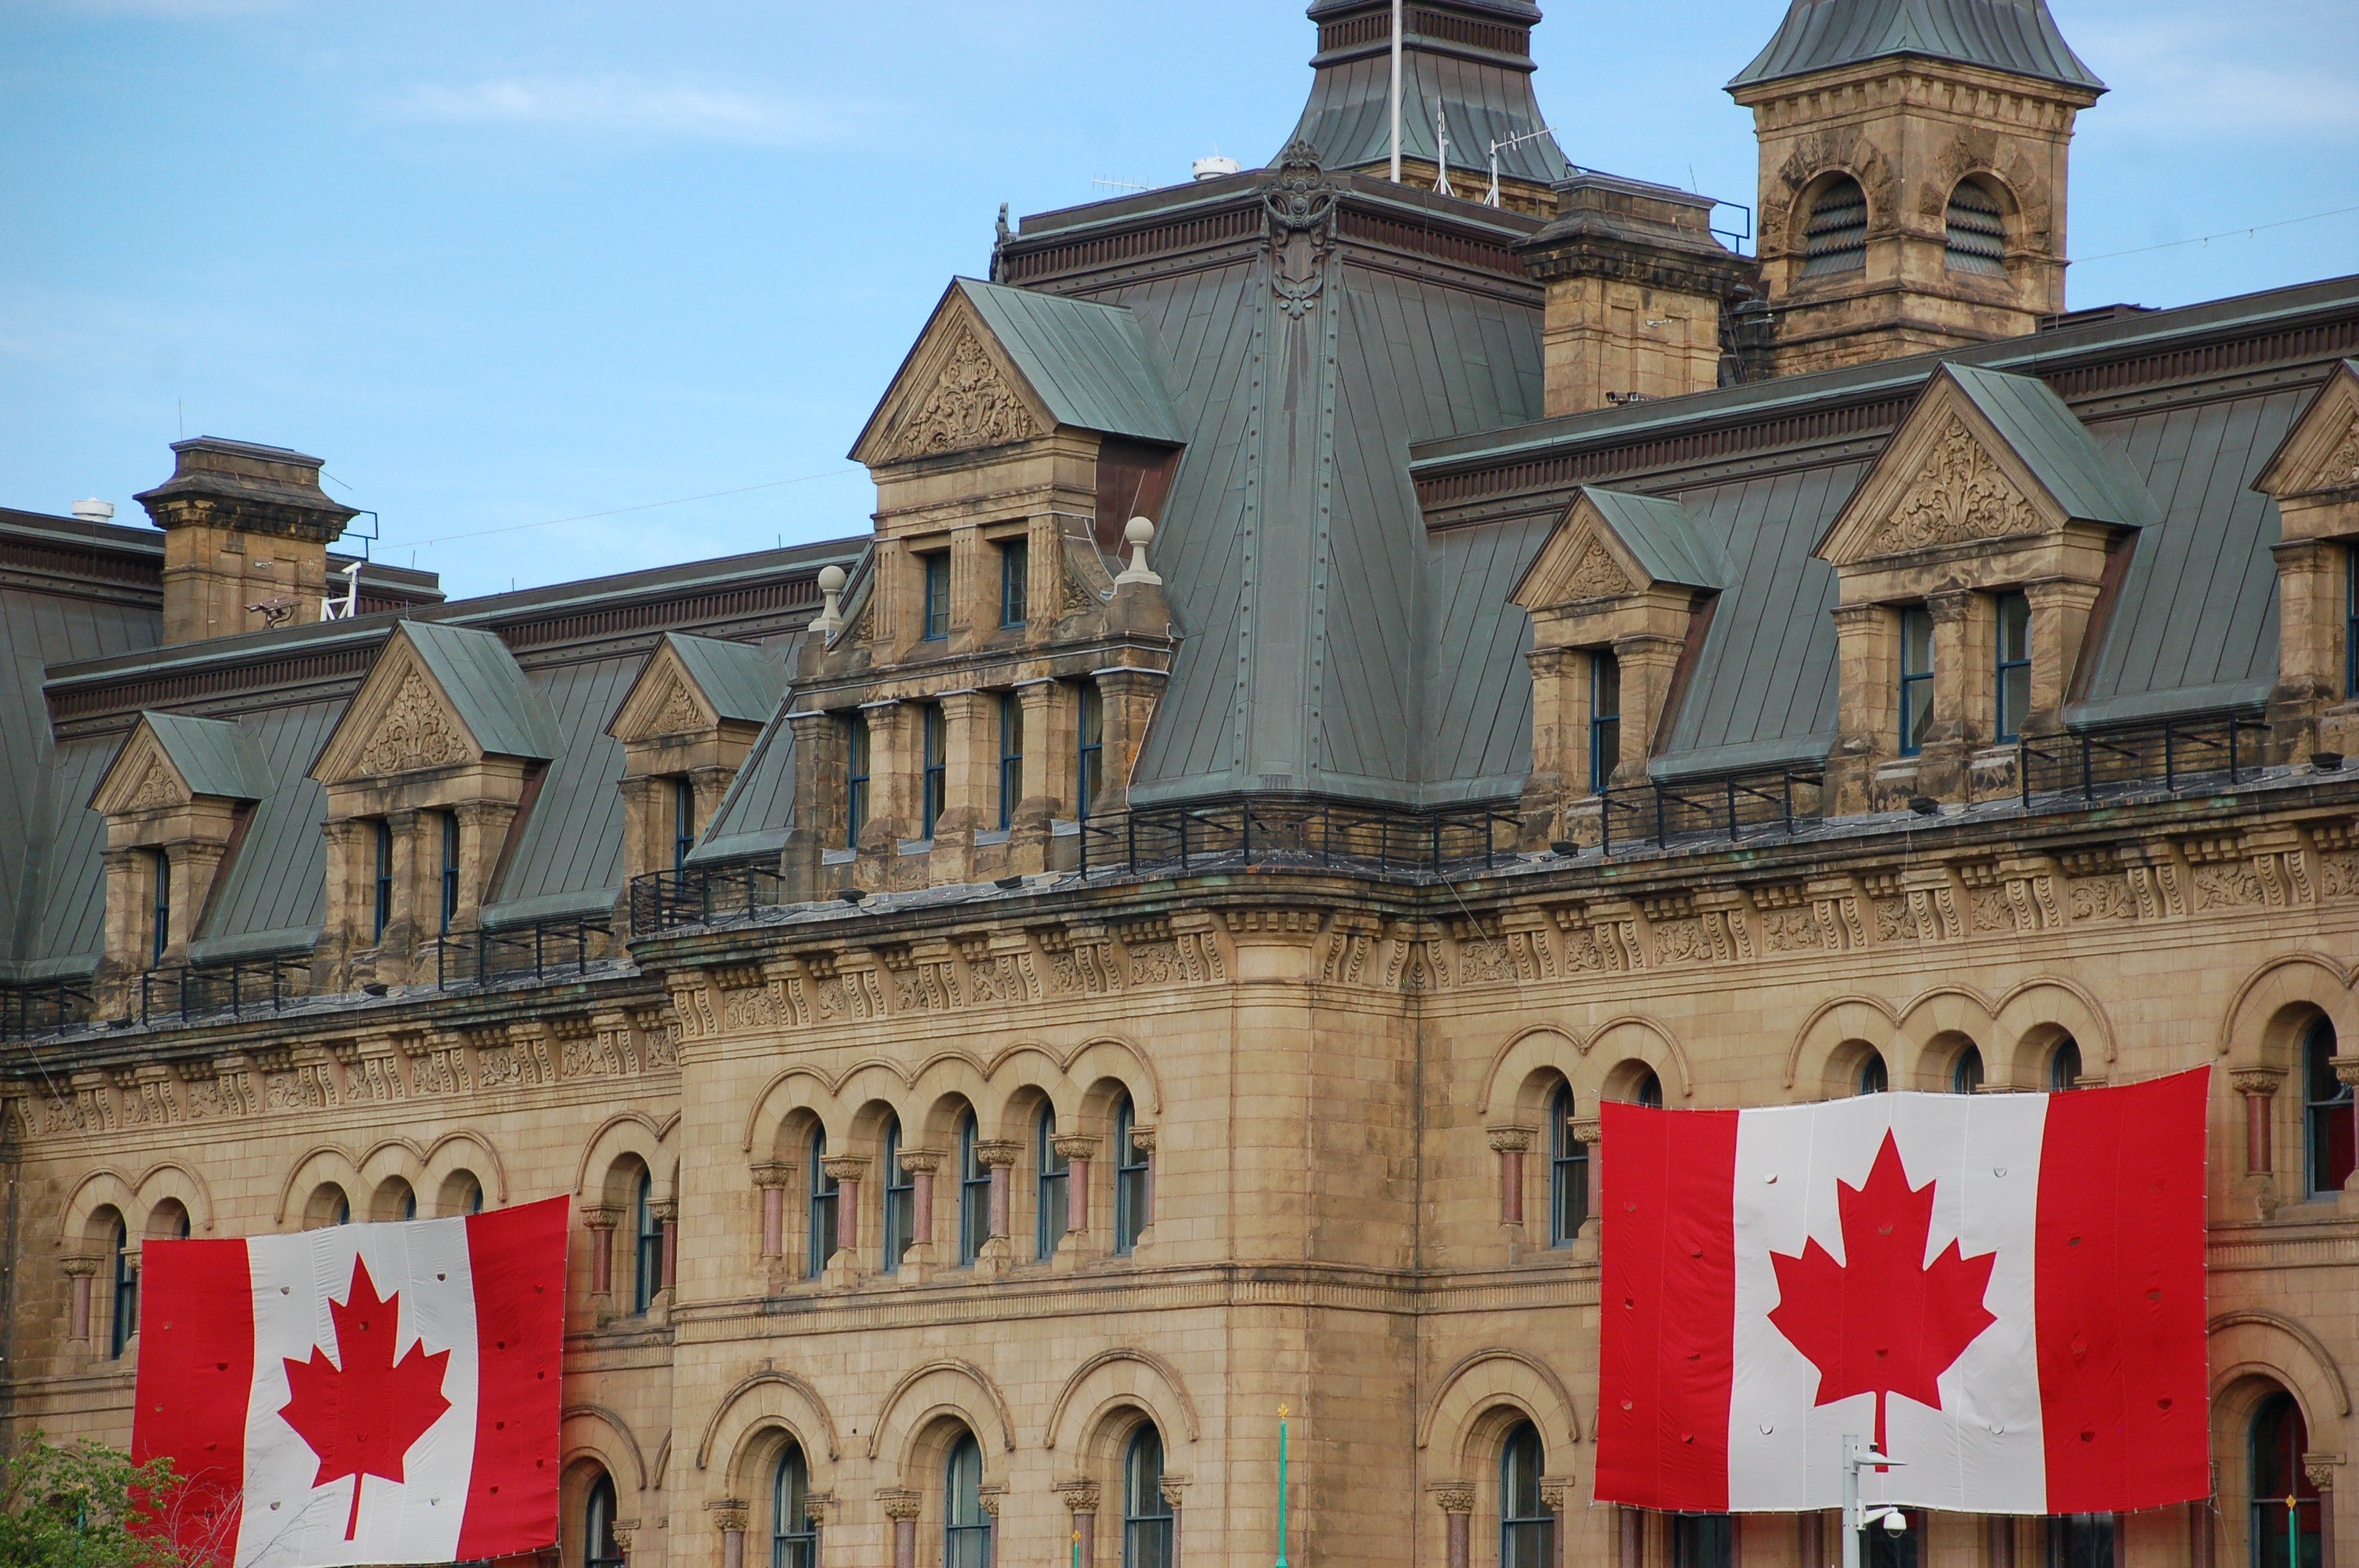 This is a picture of the canadian parliament with the canadian flag